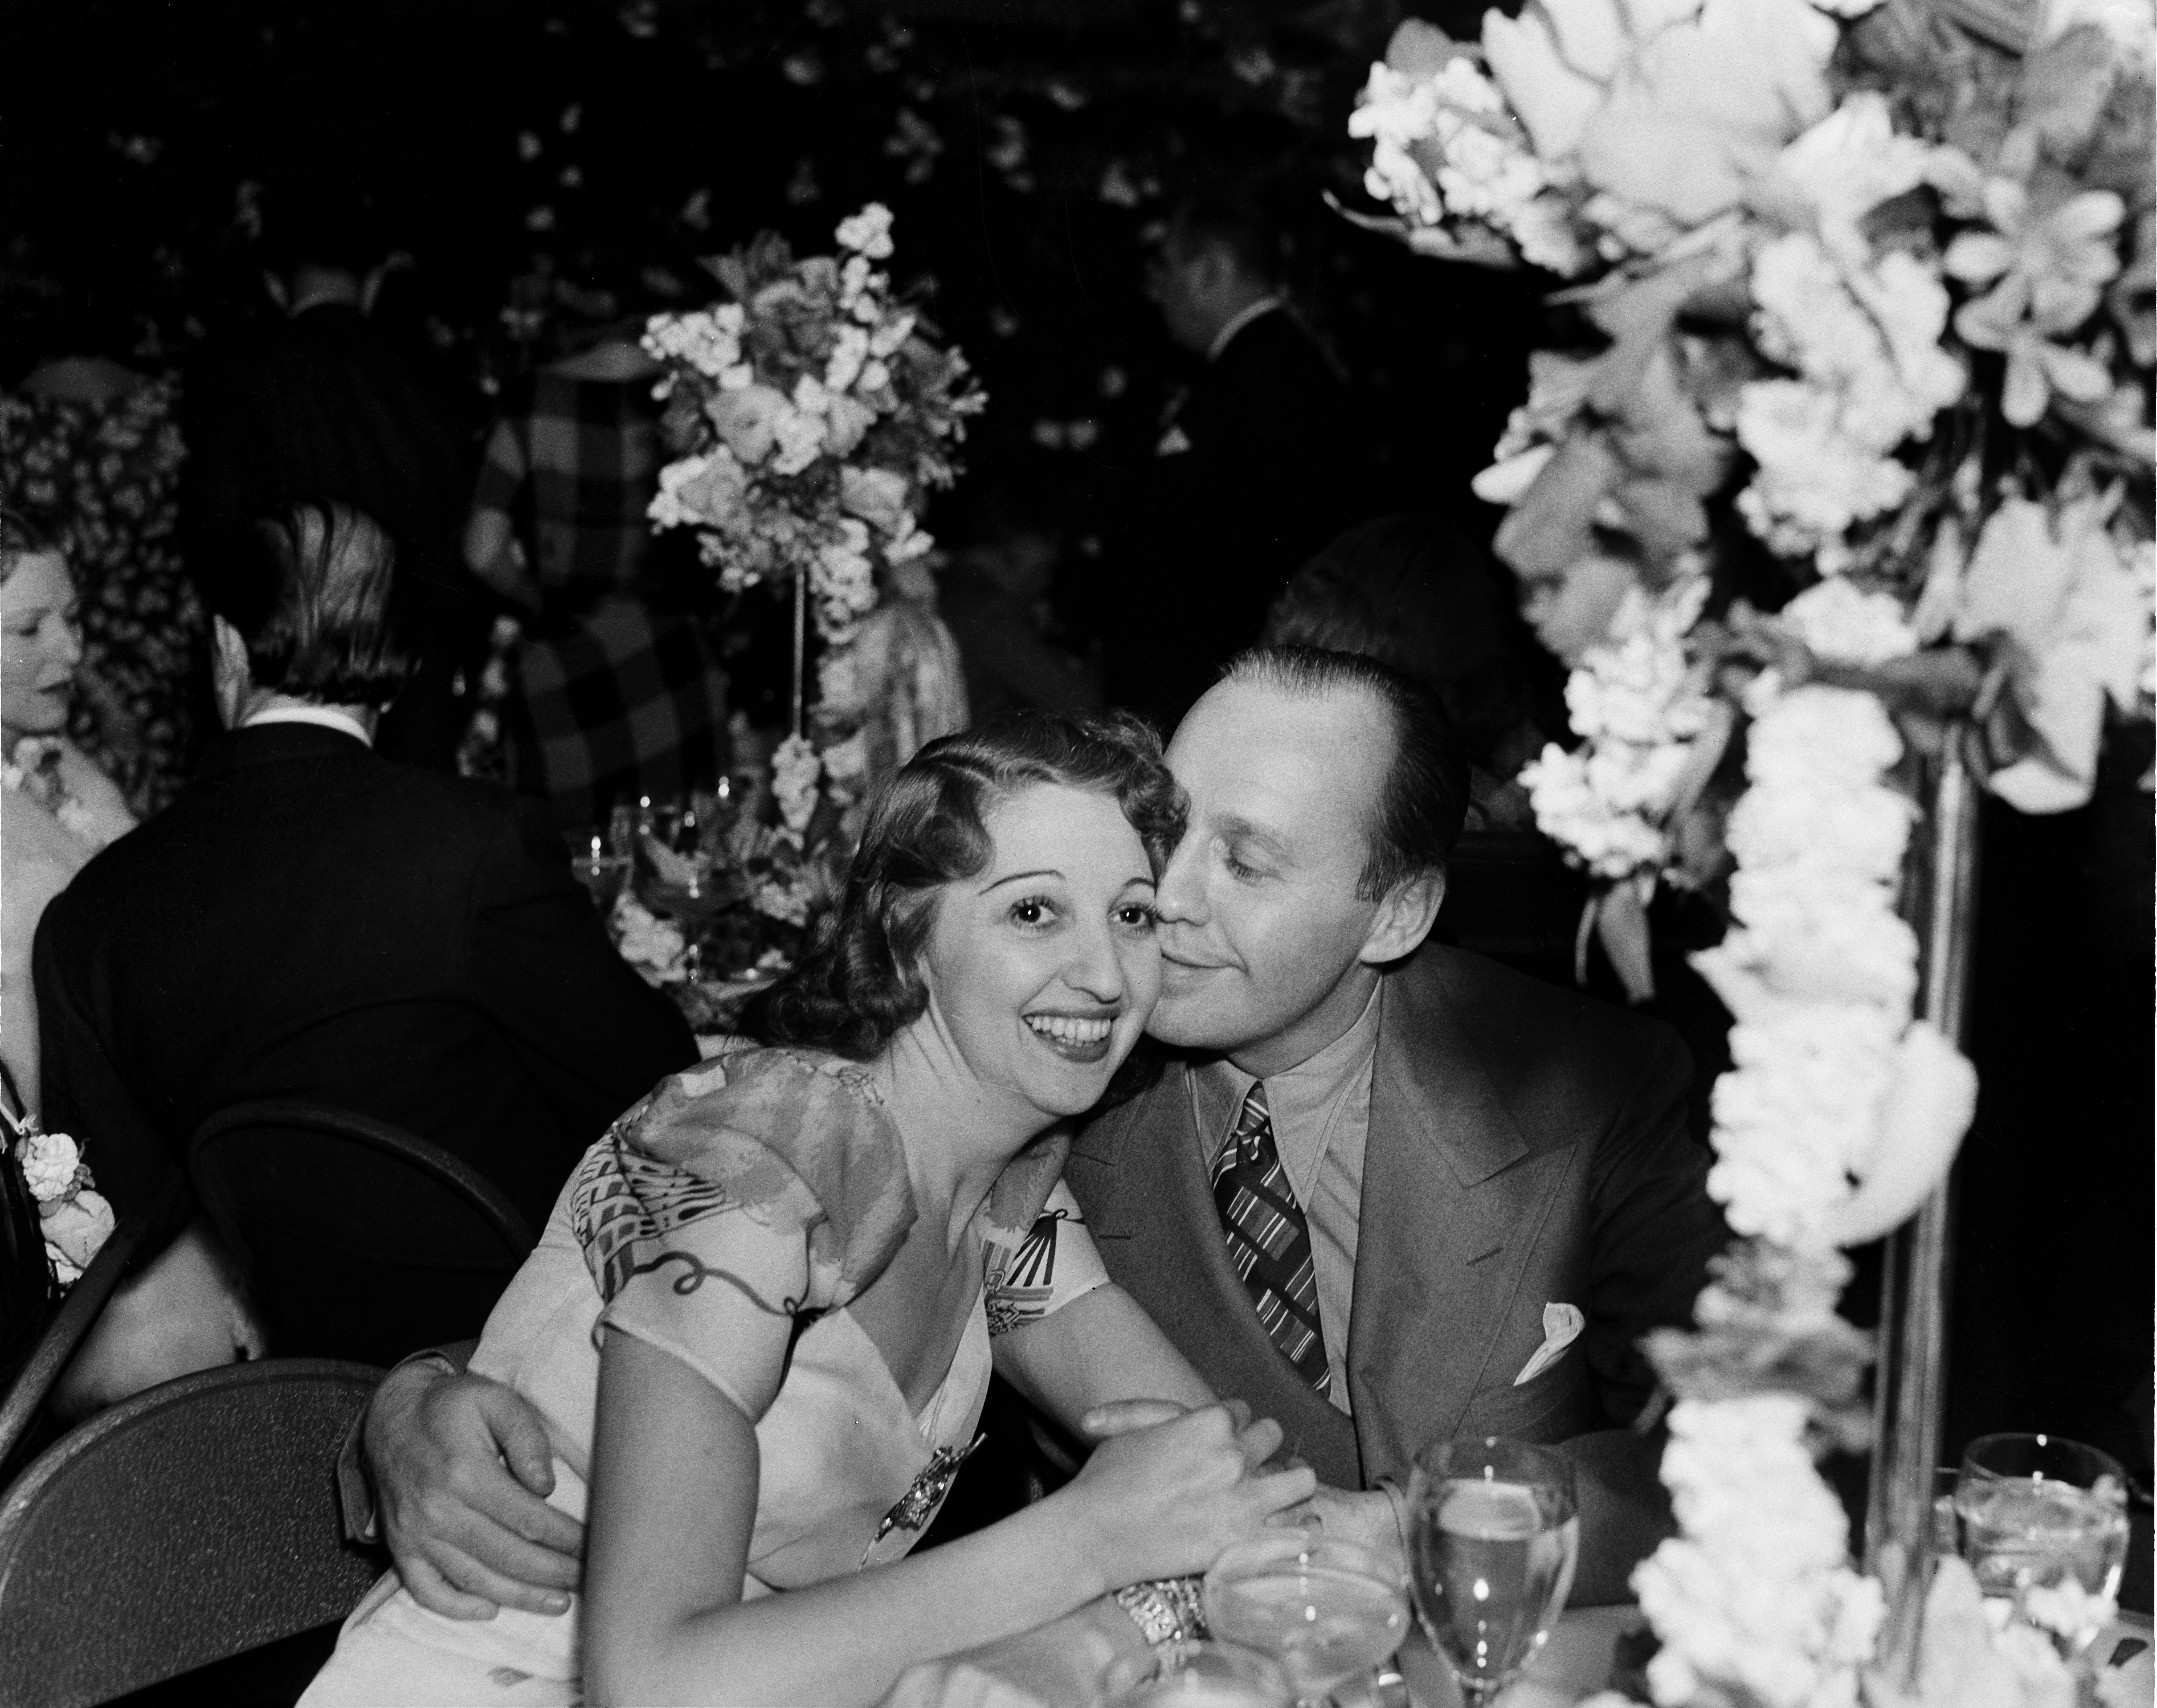 Comedian Jack Benny and wife Mary Livingston attend an event in Los Angeles, California circa 1940 | Source: Getty Images